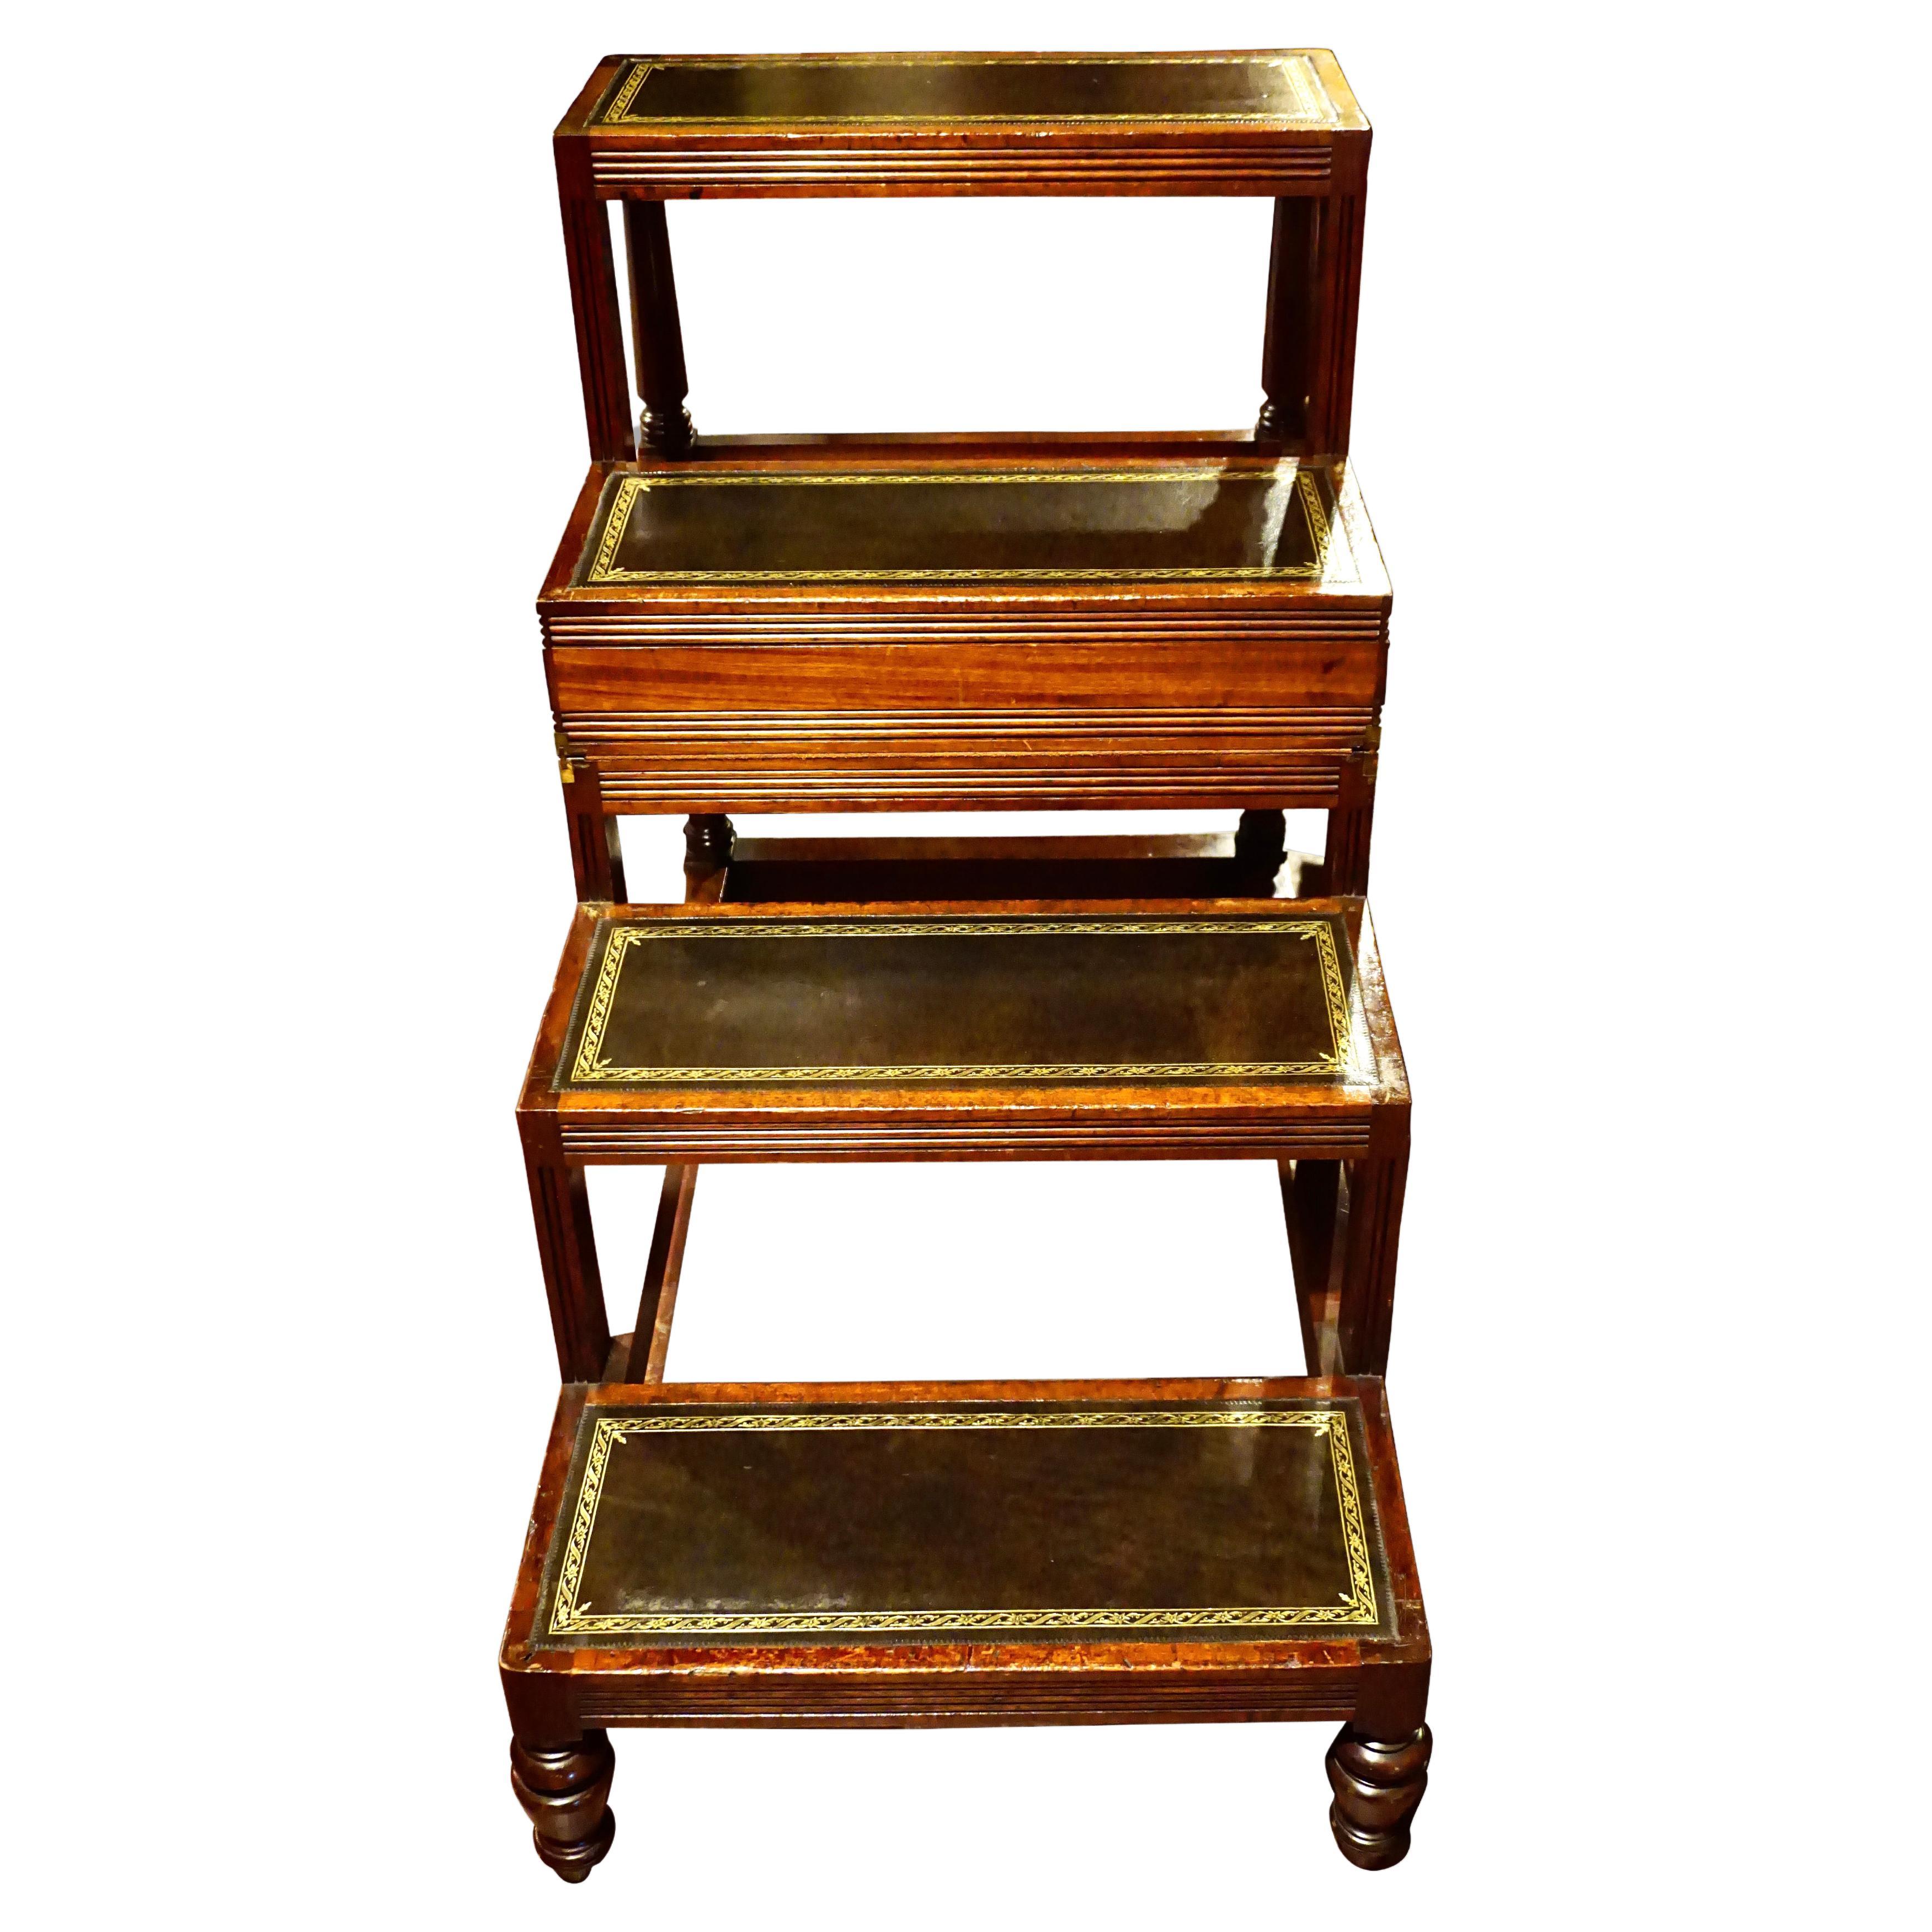 English Regency Style Metamorphic Library Table with Leather Lined Steps